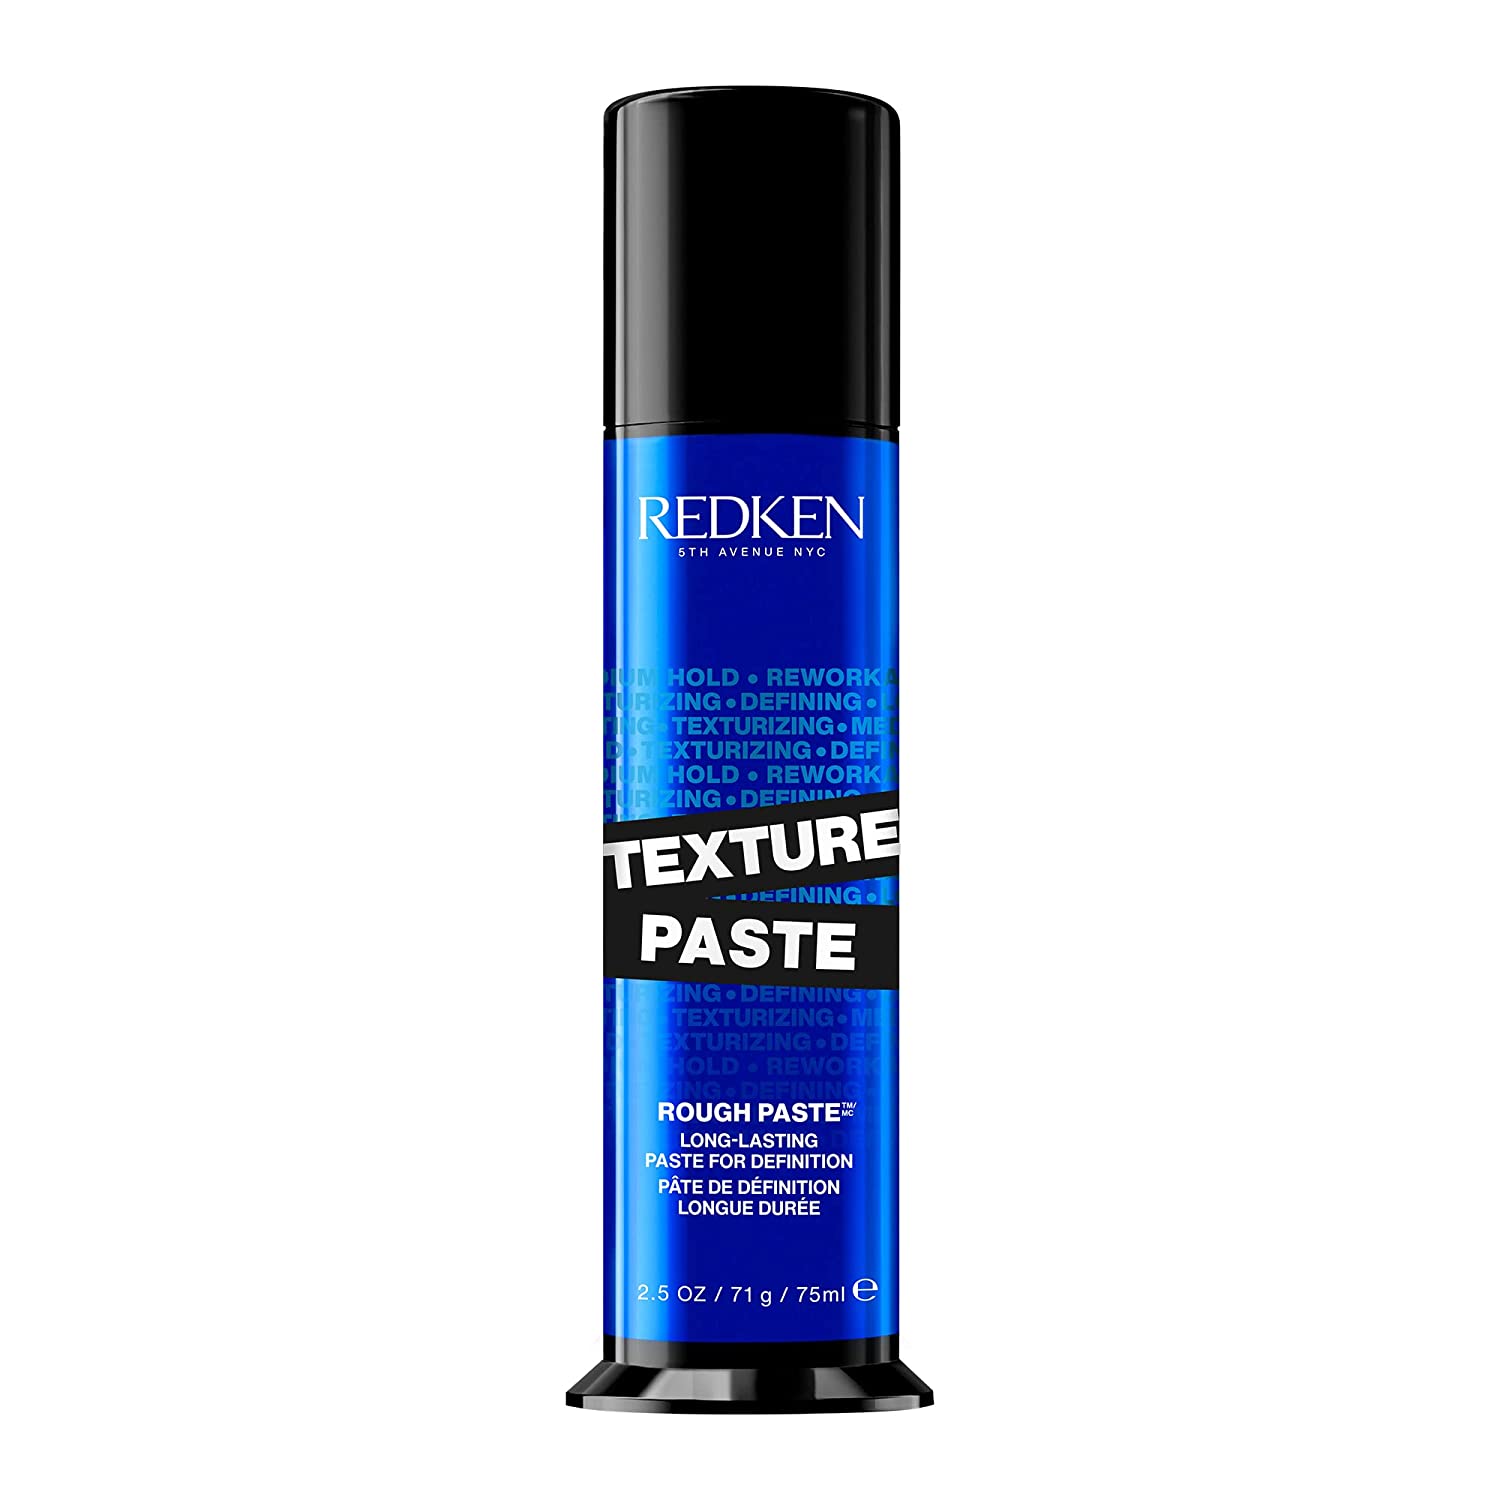 Redken Texture Paste Long-Lasting Styling Paste for Definition | For All Hair Types | Adds Long-Lasting Texture & Definition | Flexible Control | Ragged & Deconstructed Styling | Medium Hold 2.5 Oz - image 1 of 2